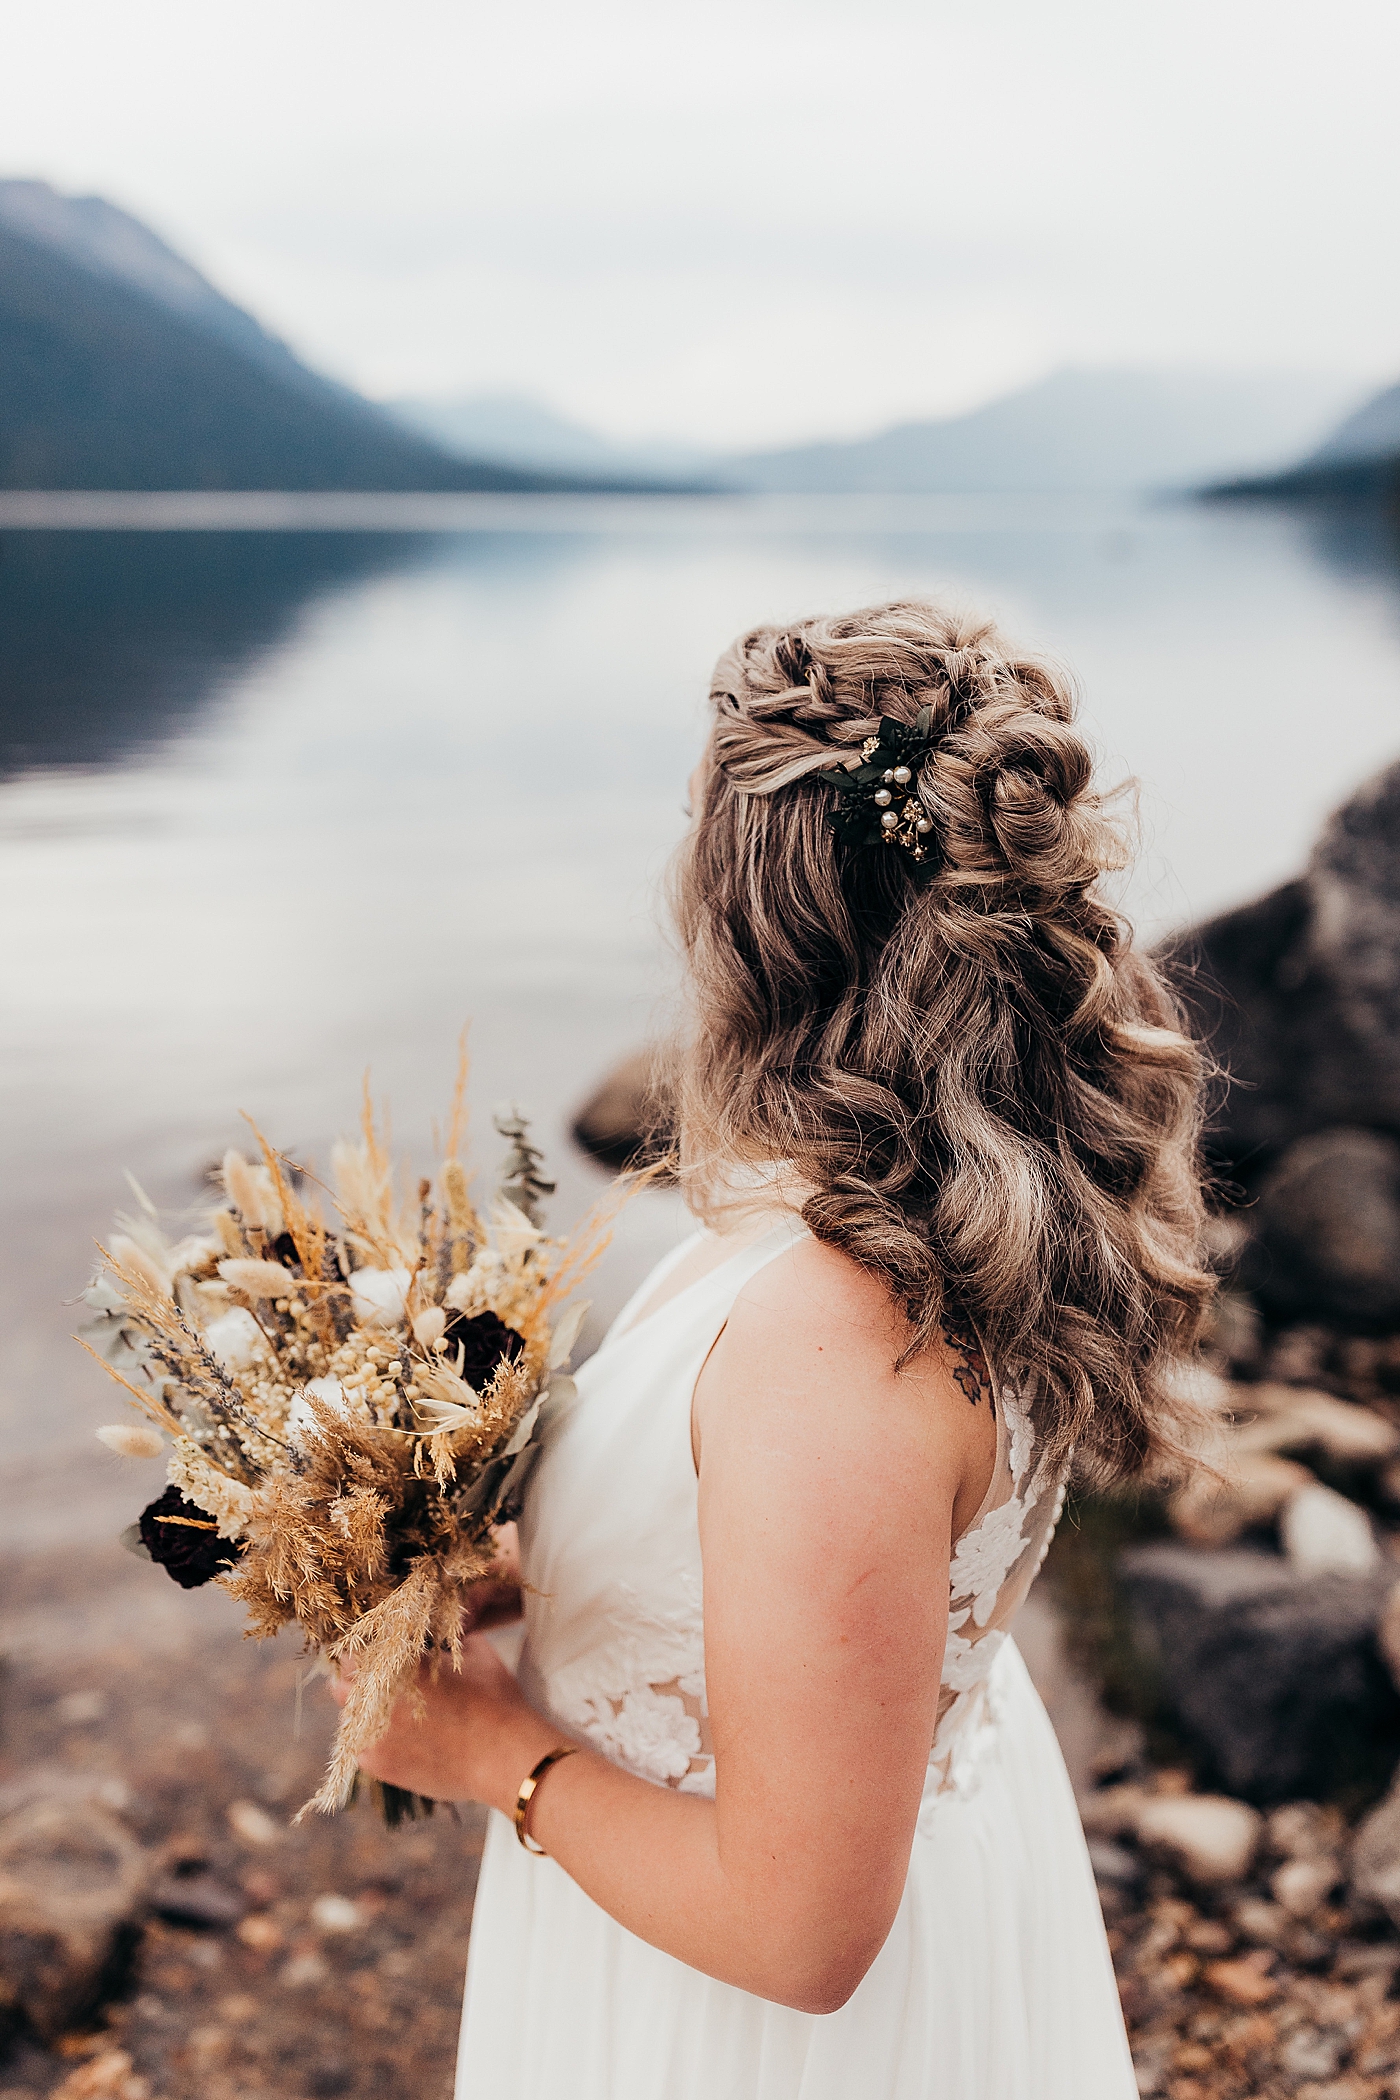 Bridal hair and bouquet for elopement. Photo by Megan Montalvo Photography.